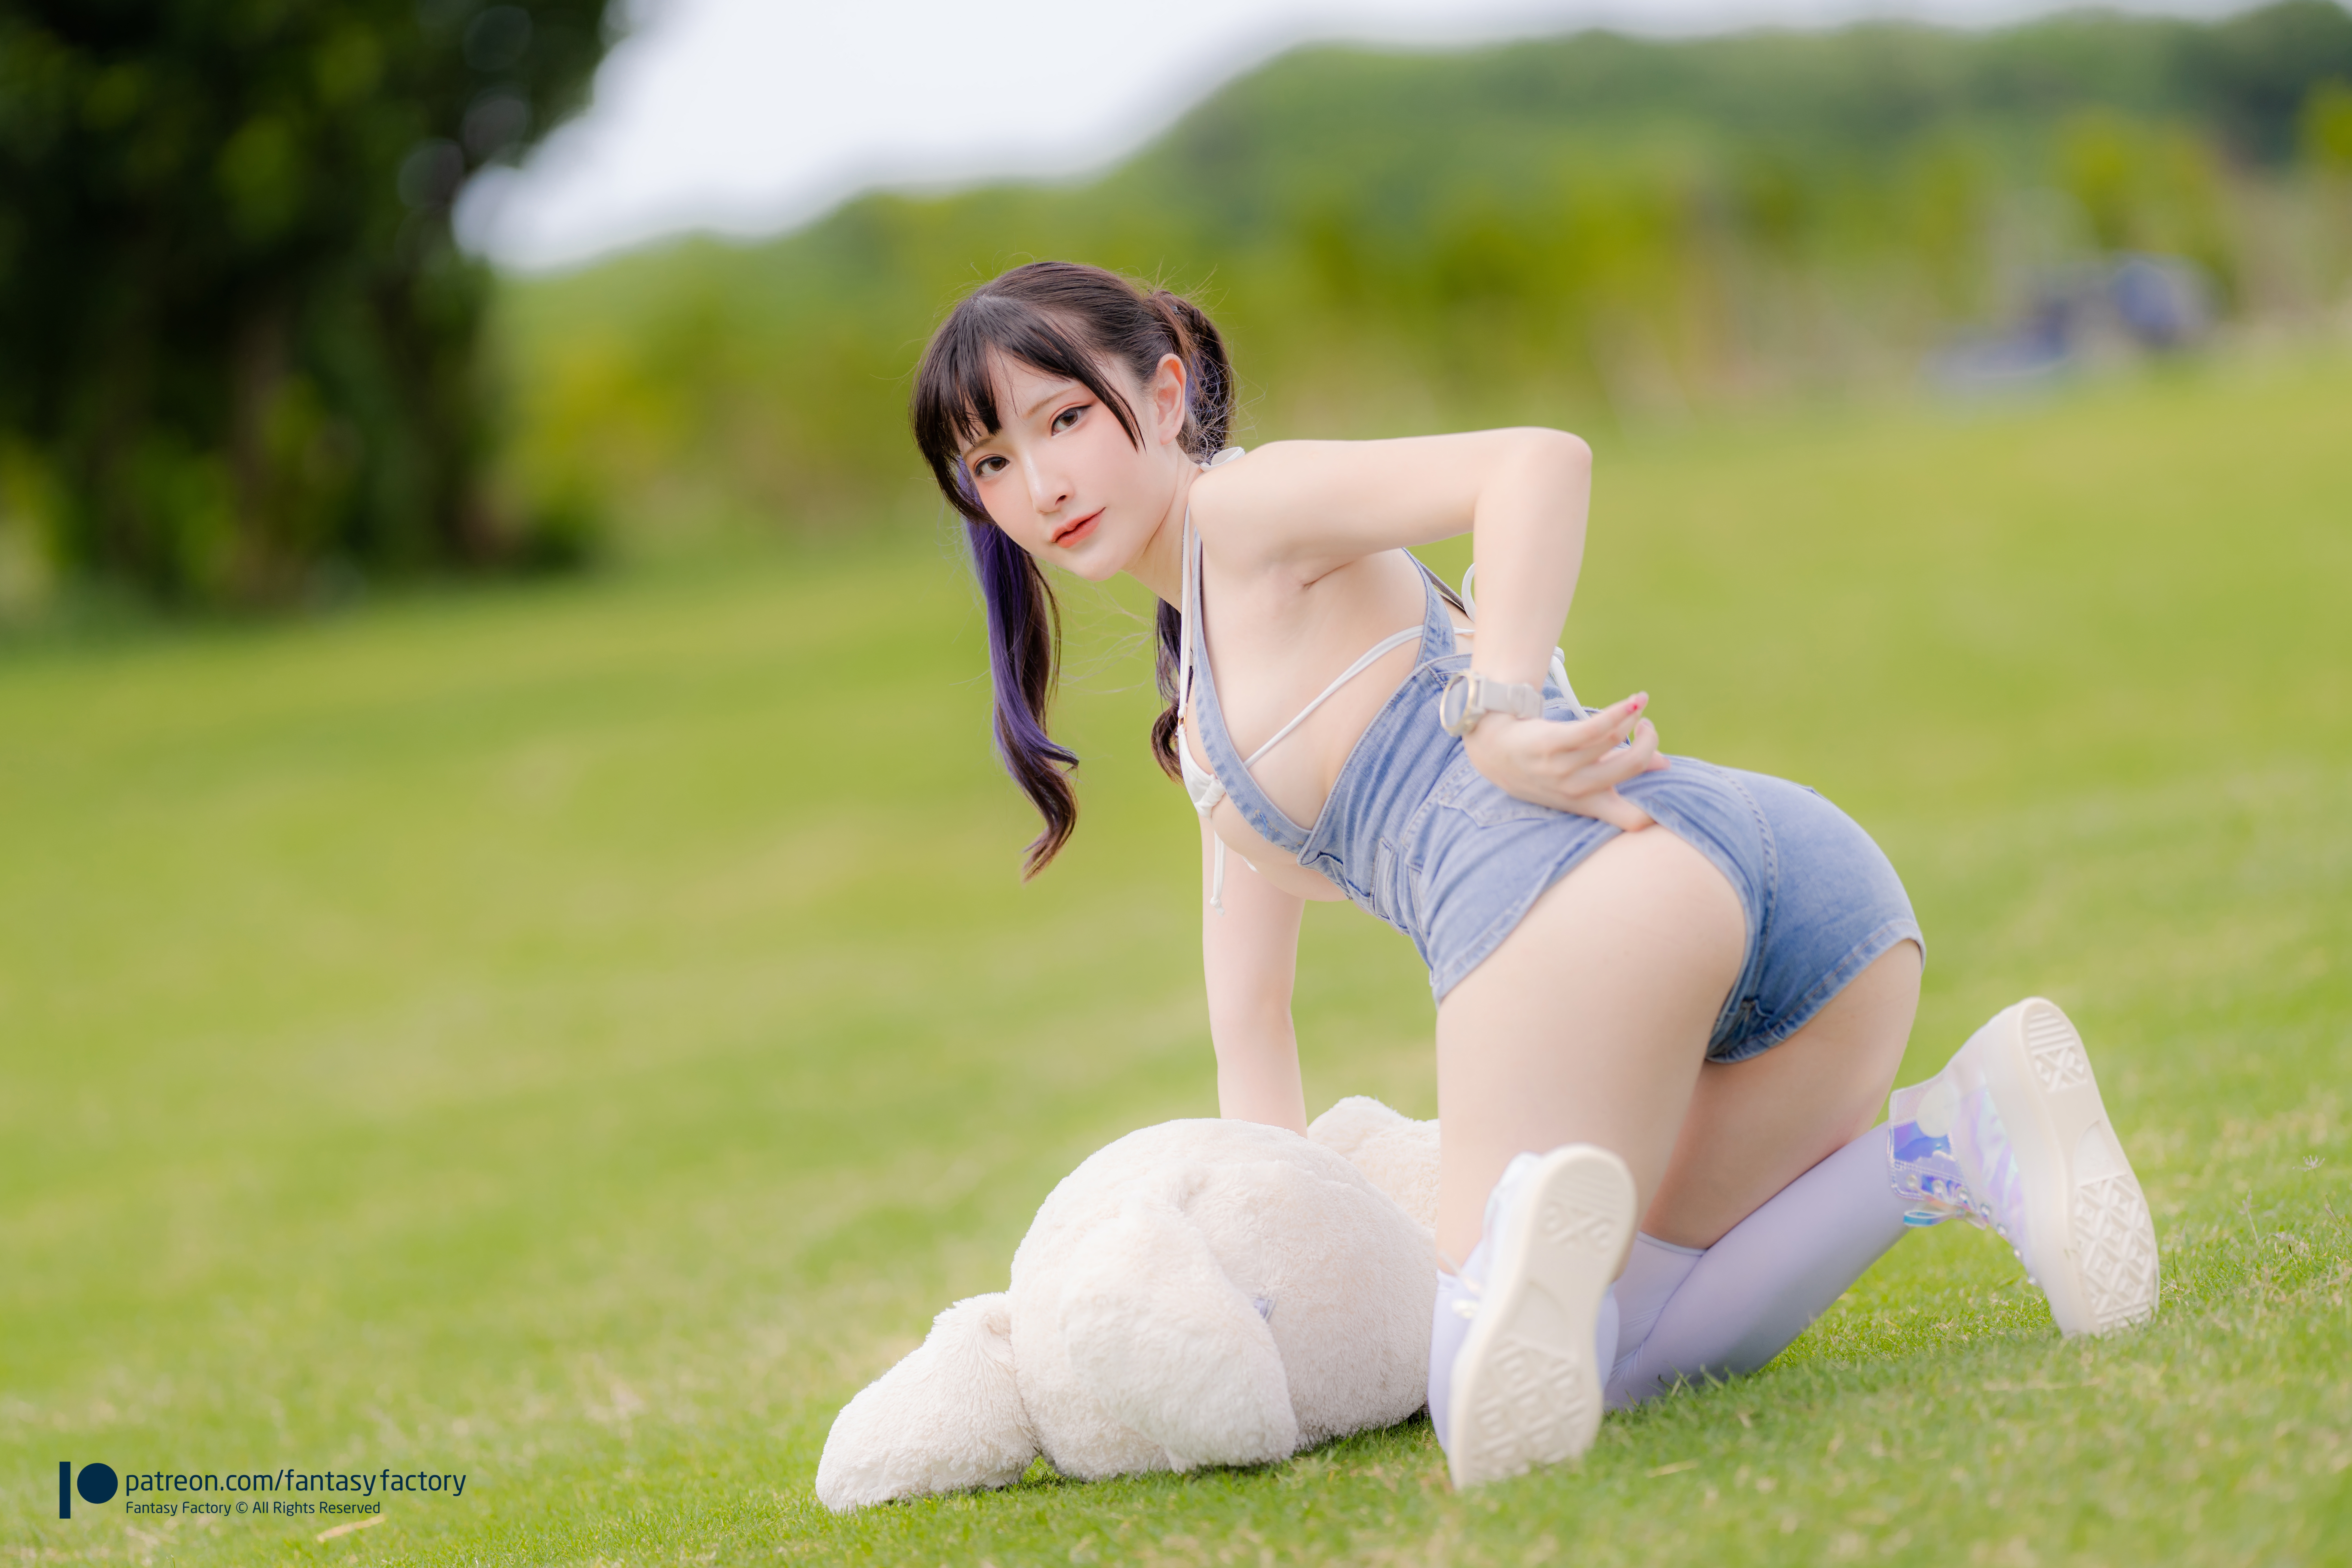 People 8640x5760 Fantasy Factory women model brunette twintails dyed hair bikini top overalls jeans overalls ass stockings women outdoors Asian